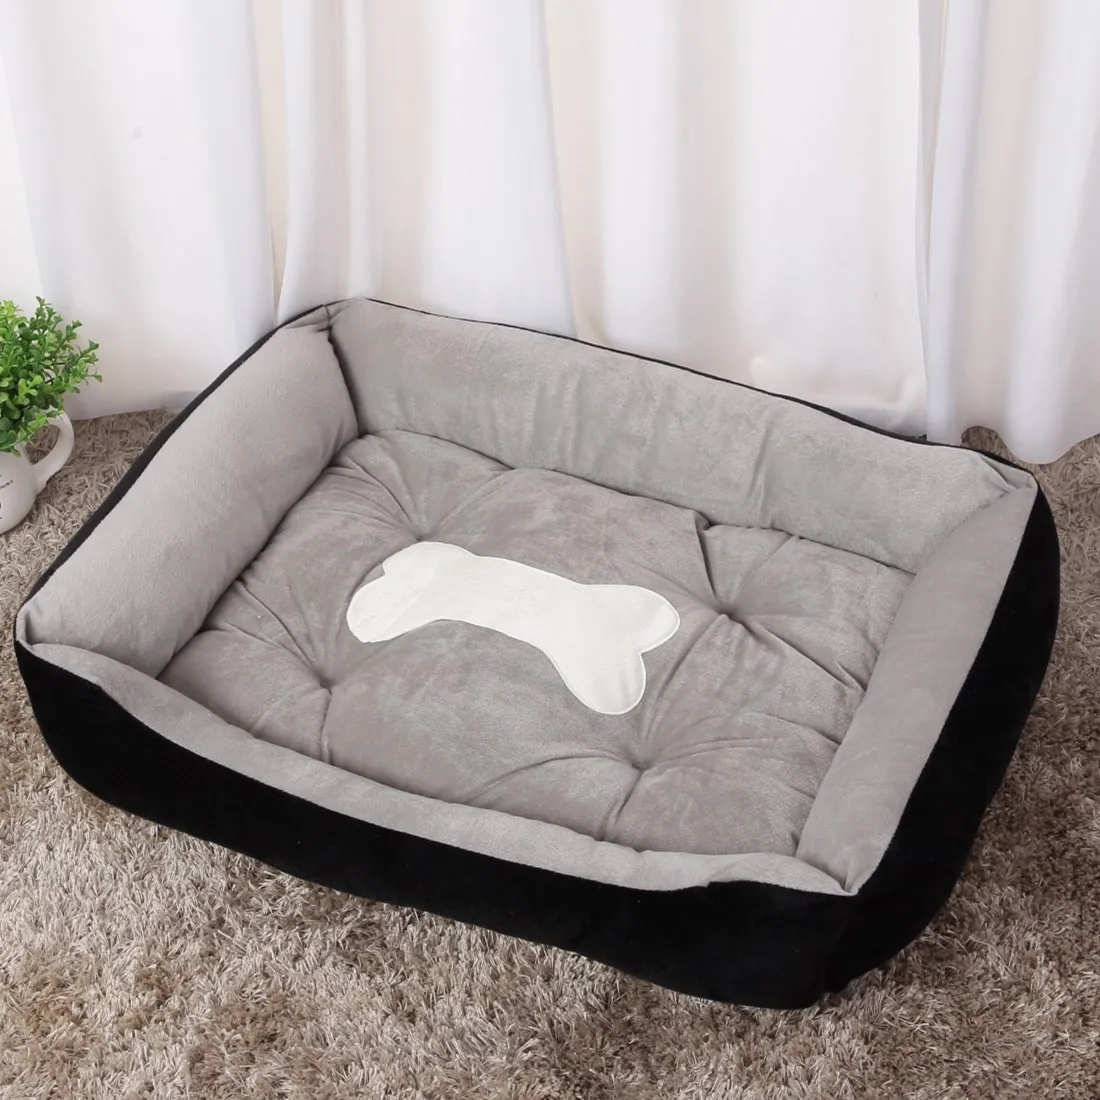 

Best Selling Luxury Different Size Bone Pattern Pet Bed Stain Resistant Luxury Super Soft Pet Cushion Warm Grey Dog Cat Sofa, Multiple colour